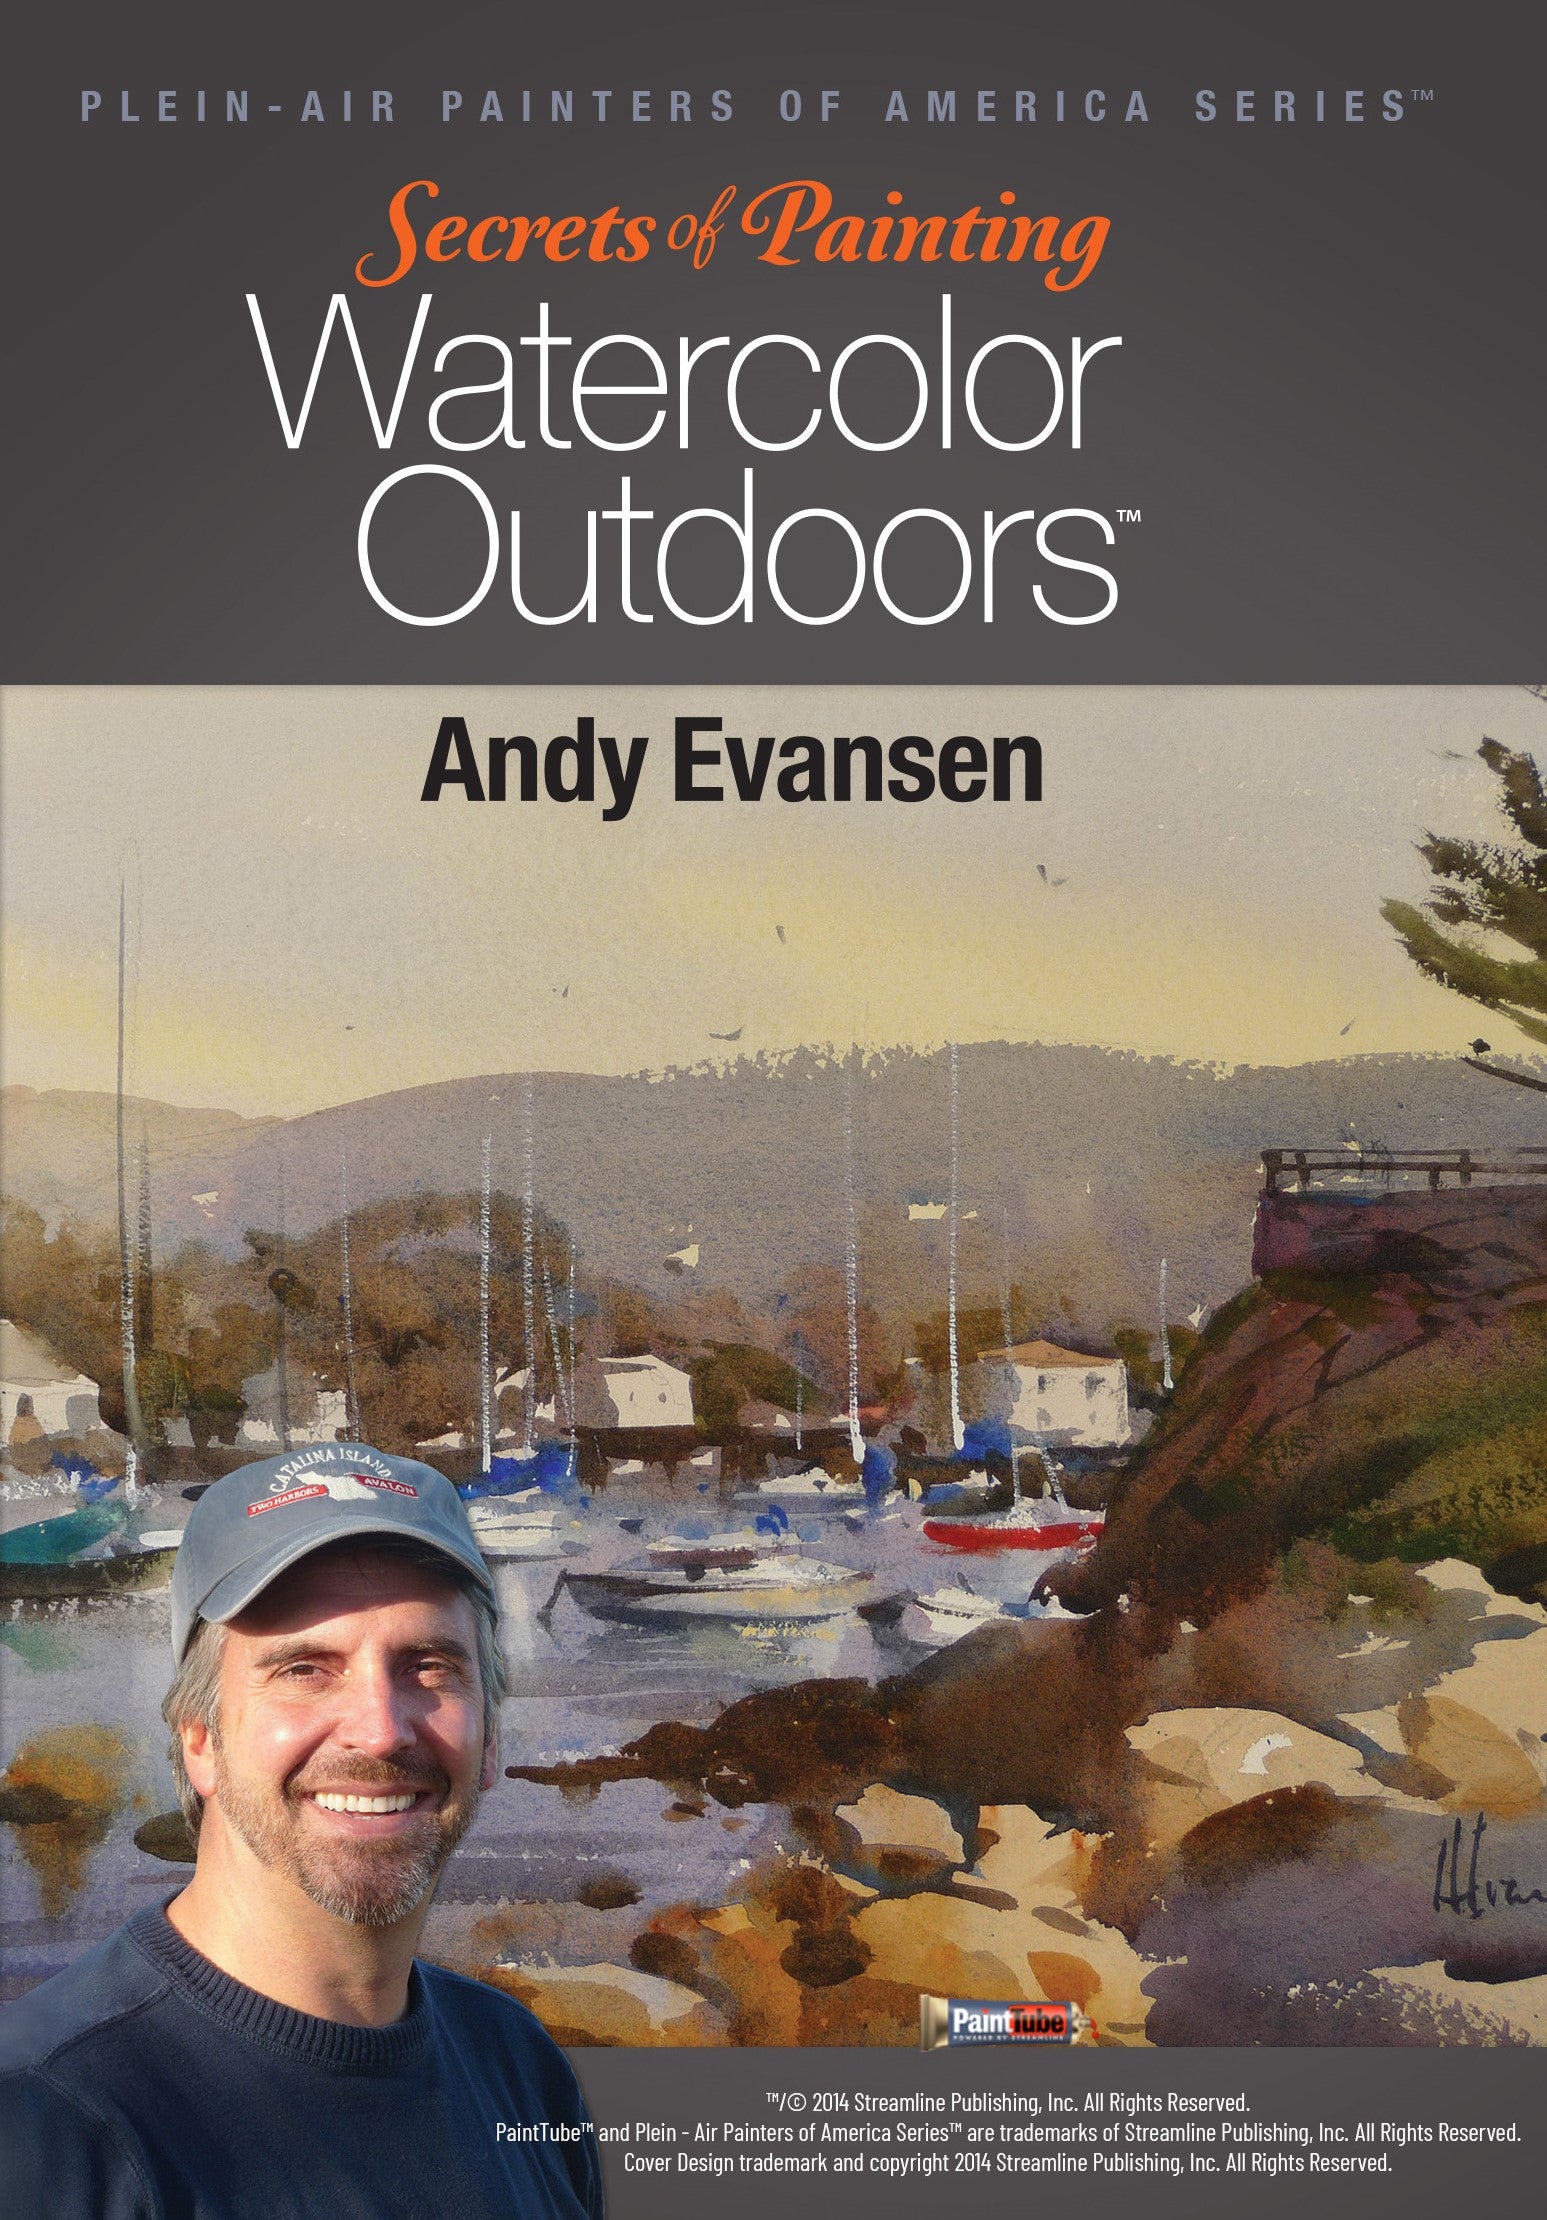 Andy Evansen: Secrets of Painting Watercolor Outdoors